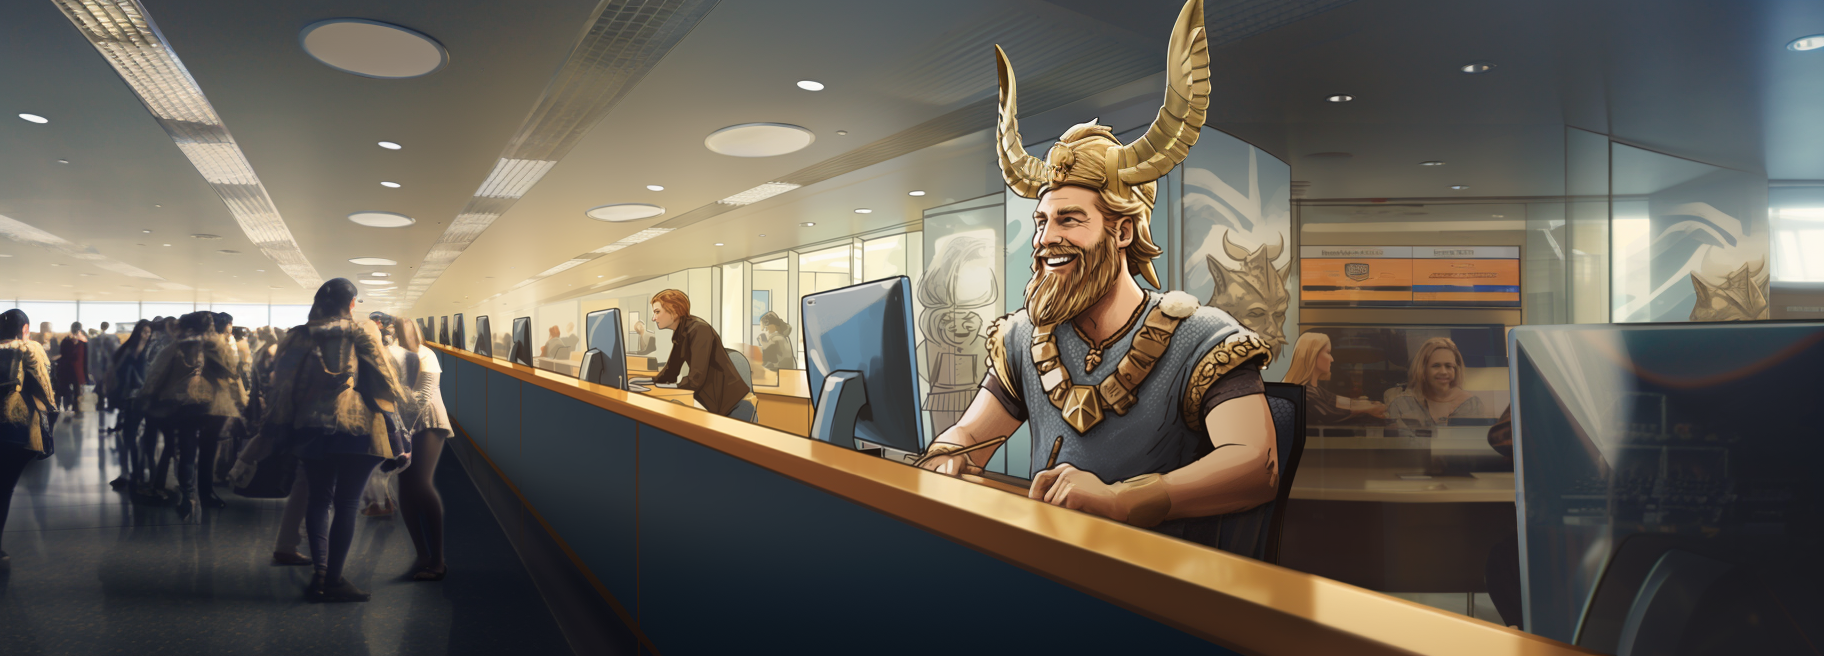 A man dressed as a viking is sitting at a counter in an airport.